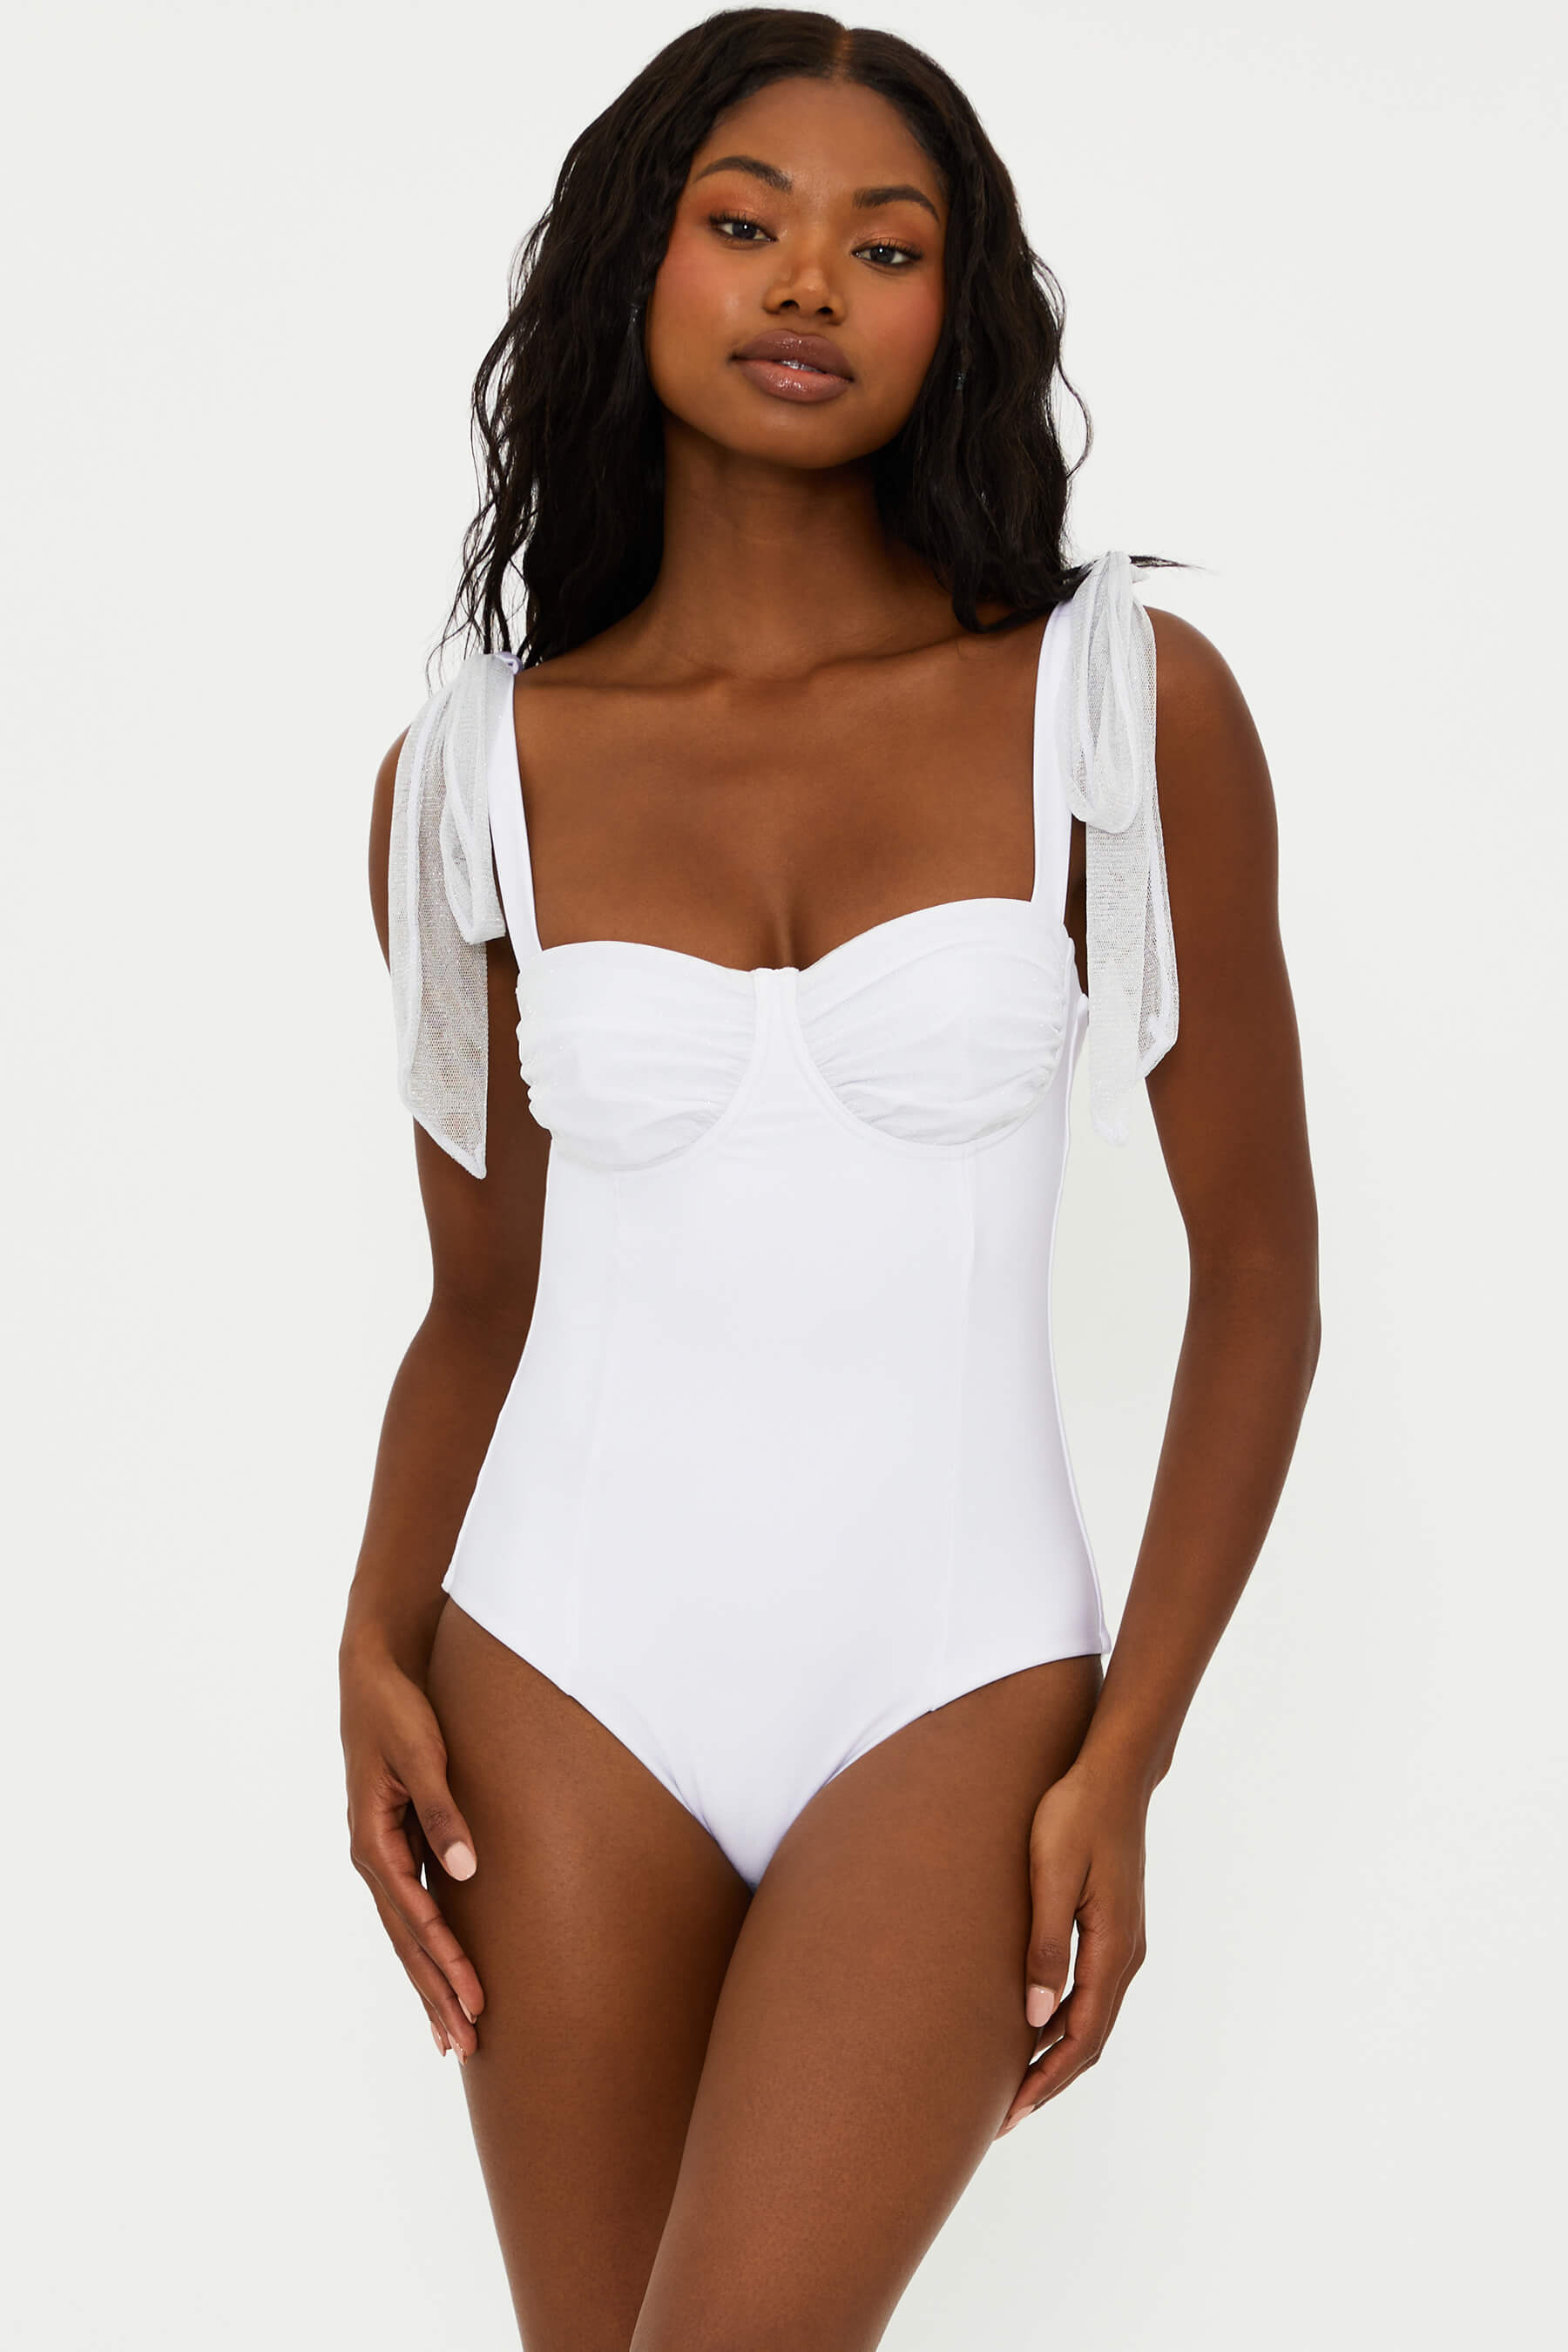 By Anthropologie Shine Ruched One-Piece Swimsuit